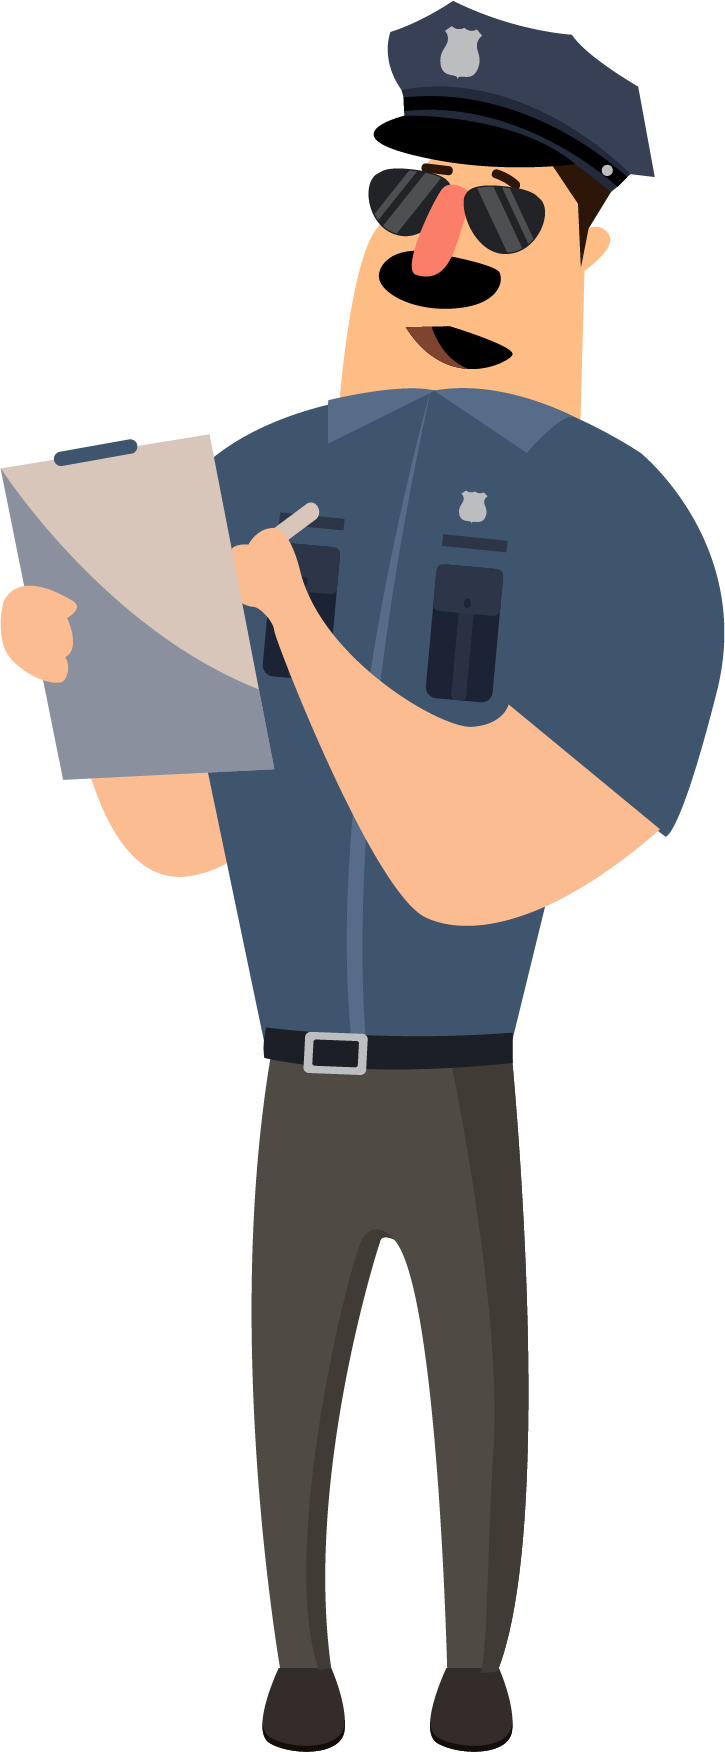 Download High Quality Police Officer Clipart Cartoon - vrogue.co